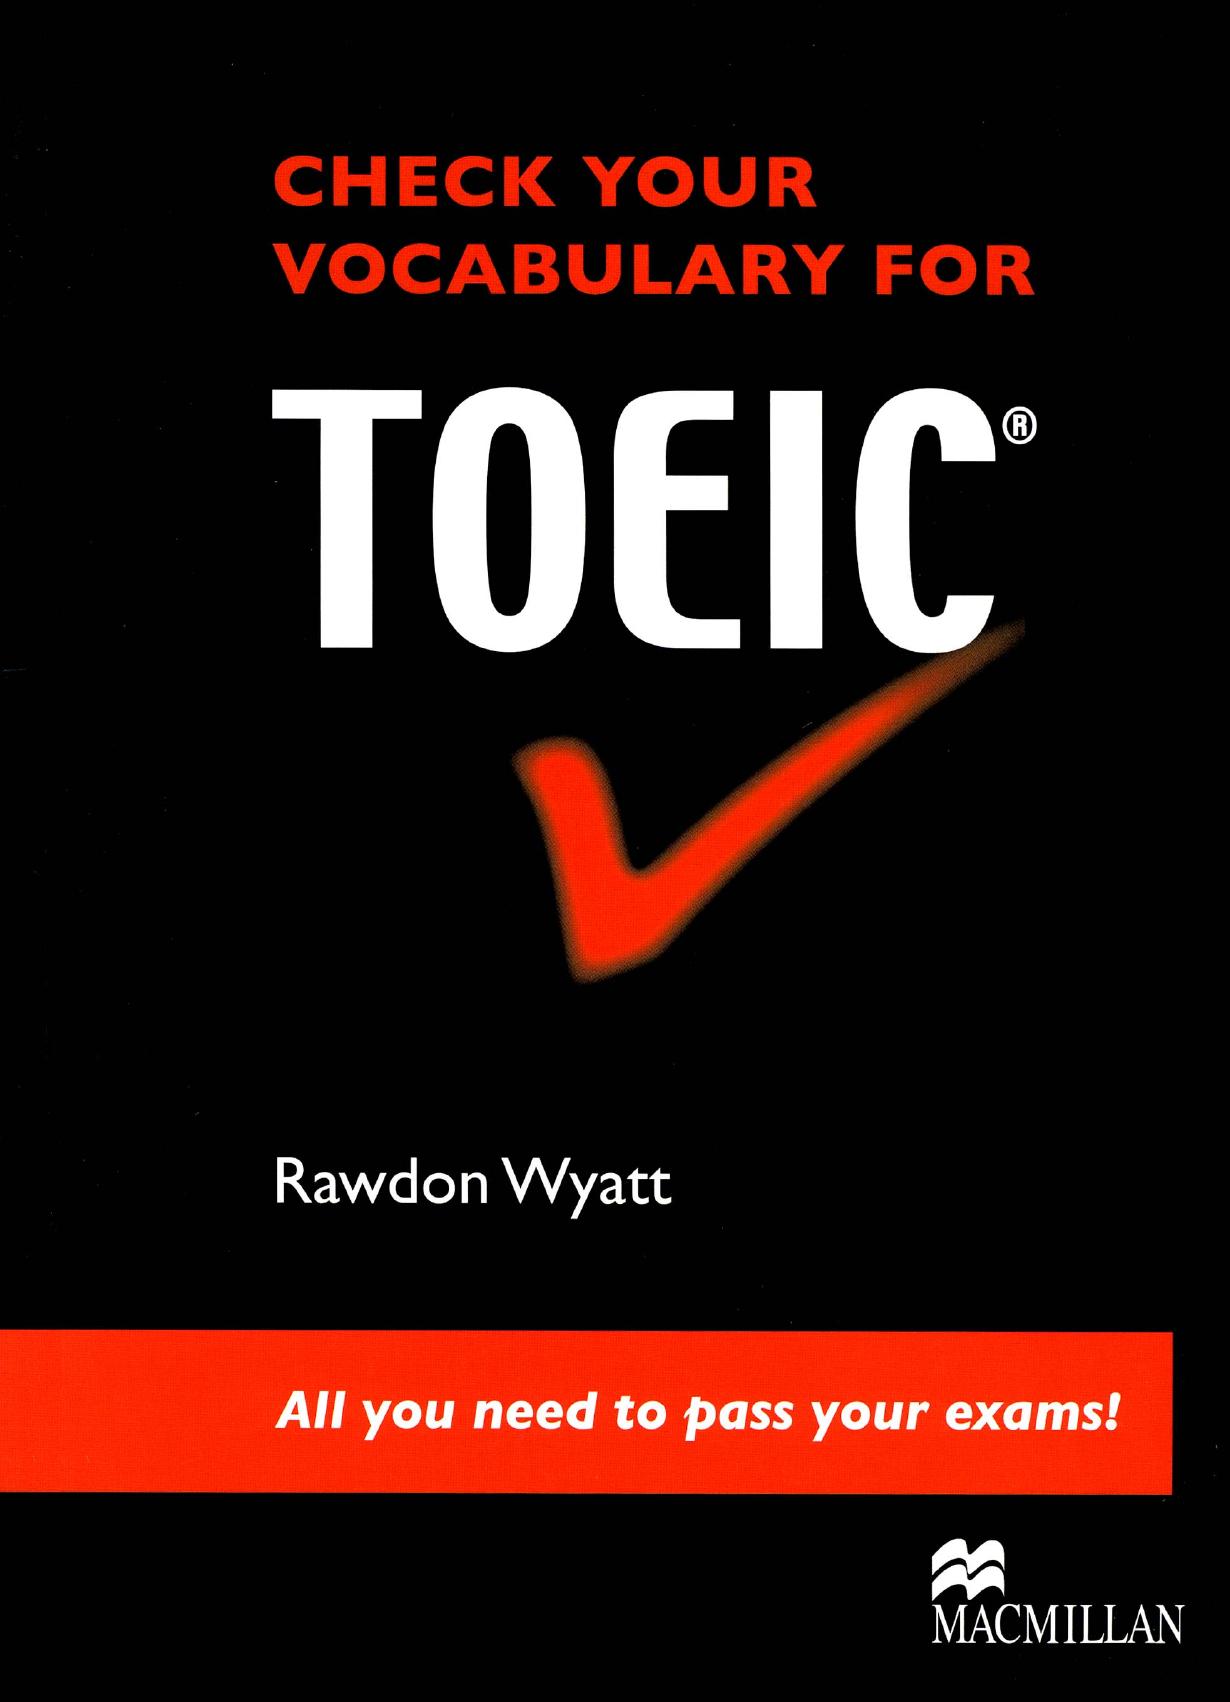 Check your vocabulary for TOEICÂ® all you need to pass your exams ! by Rawdon Wyatt